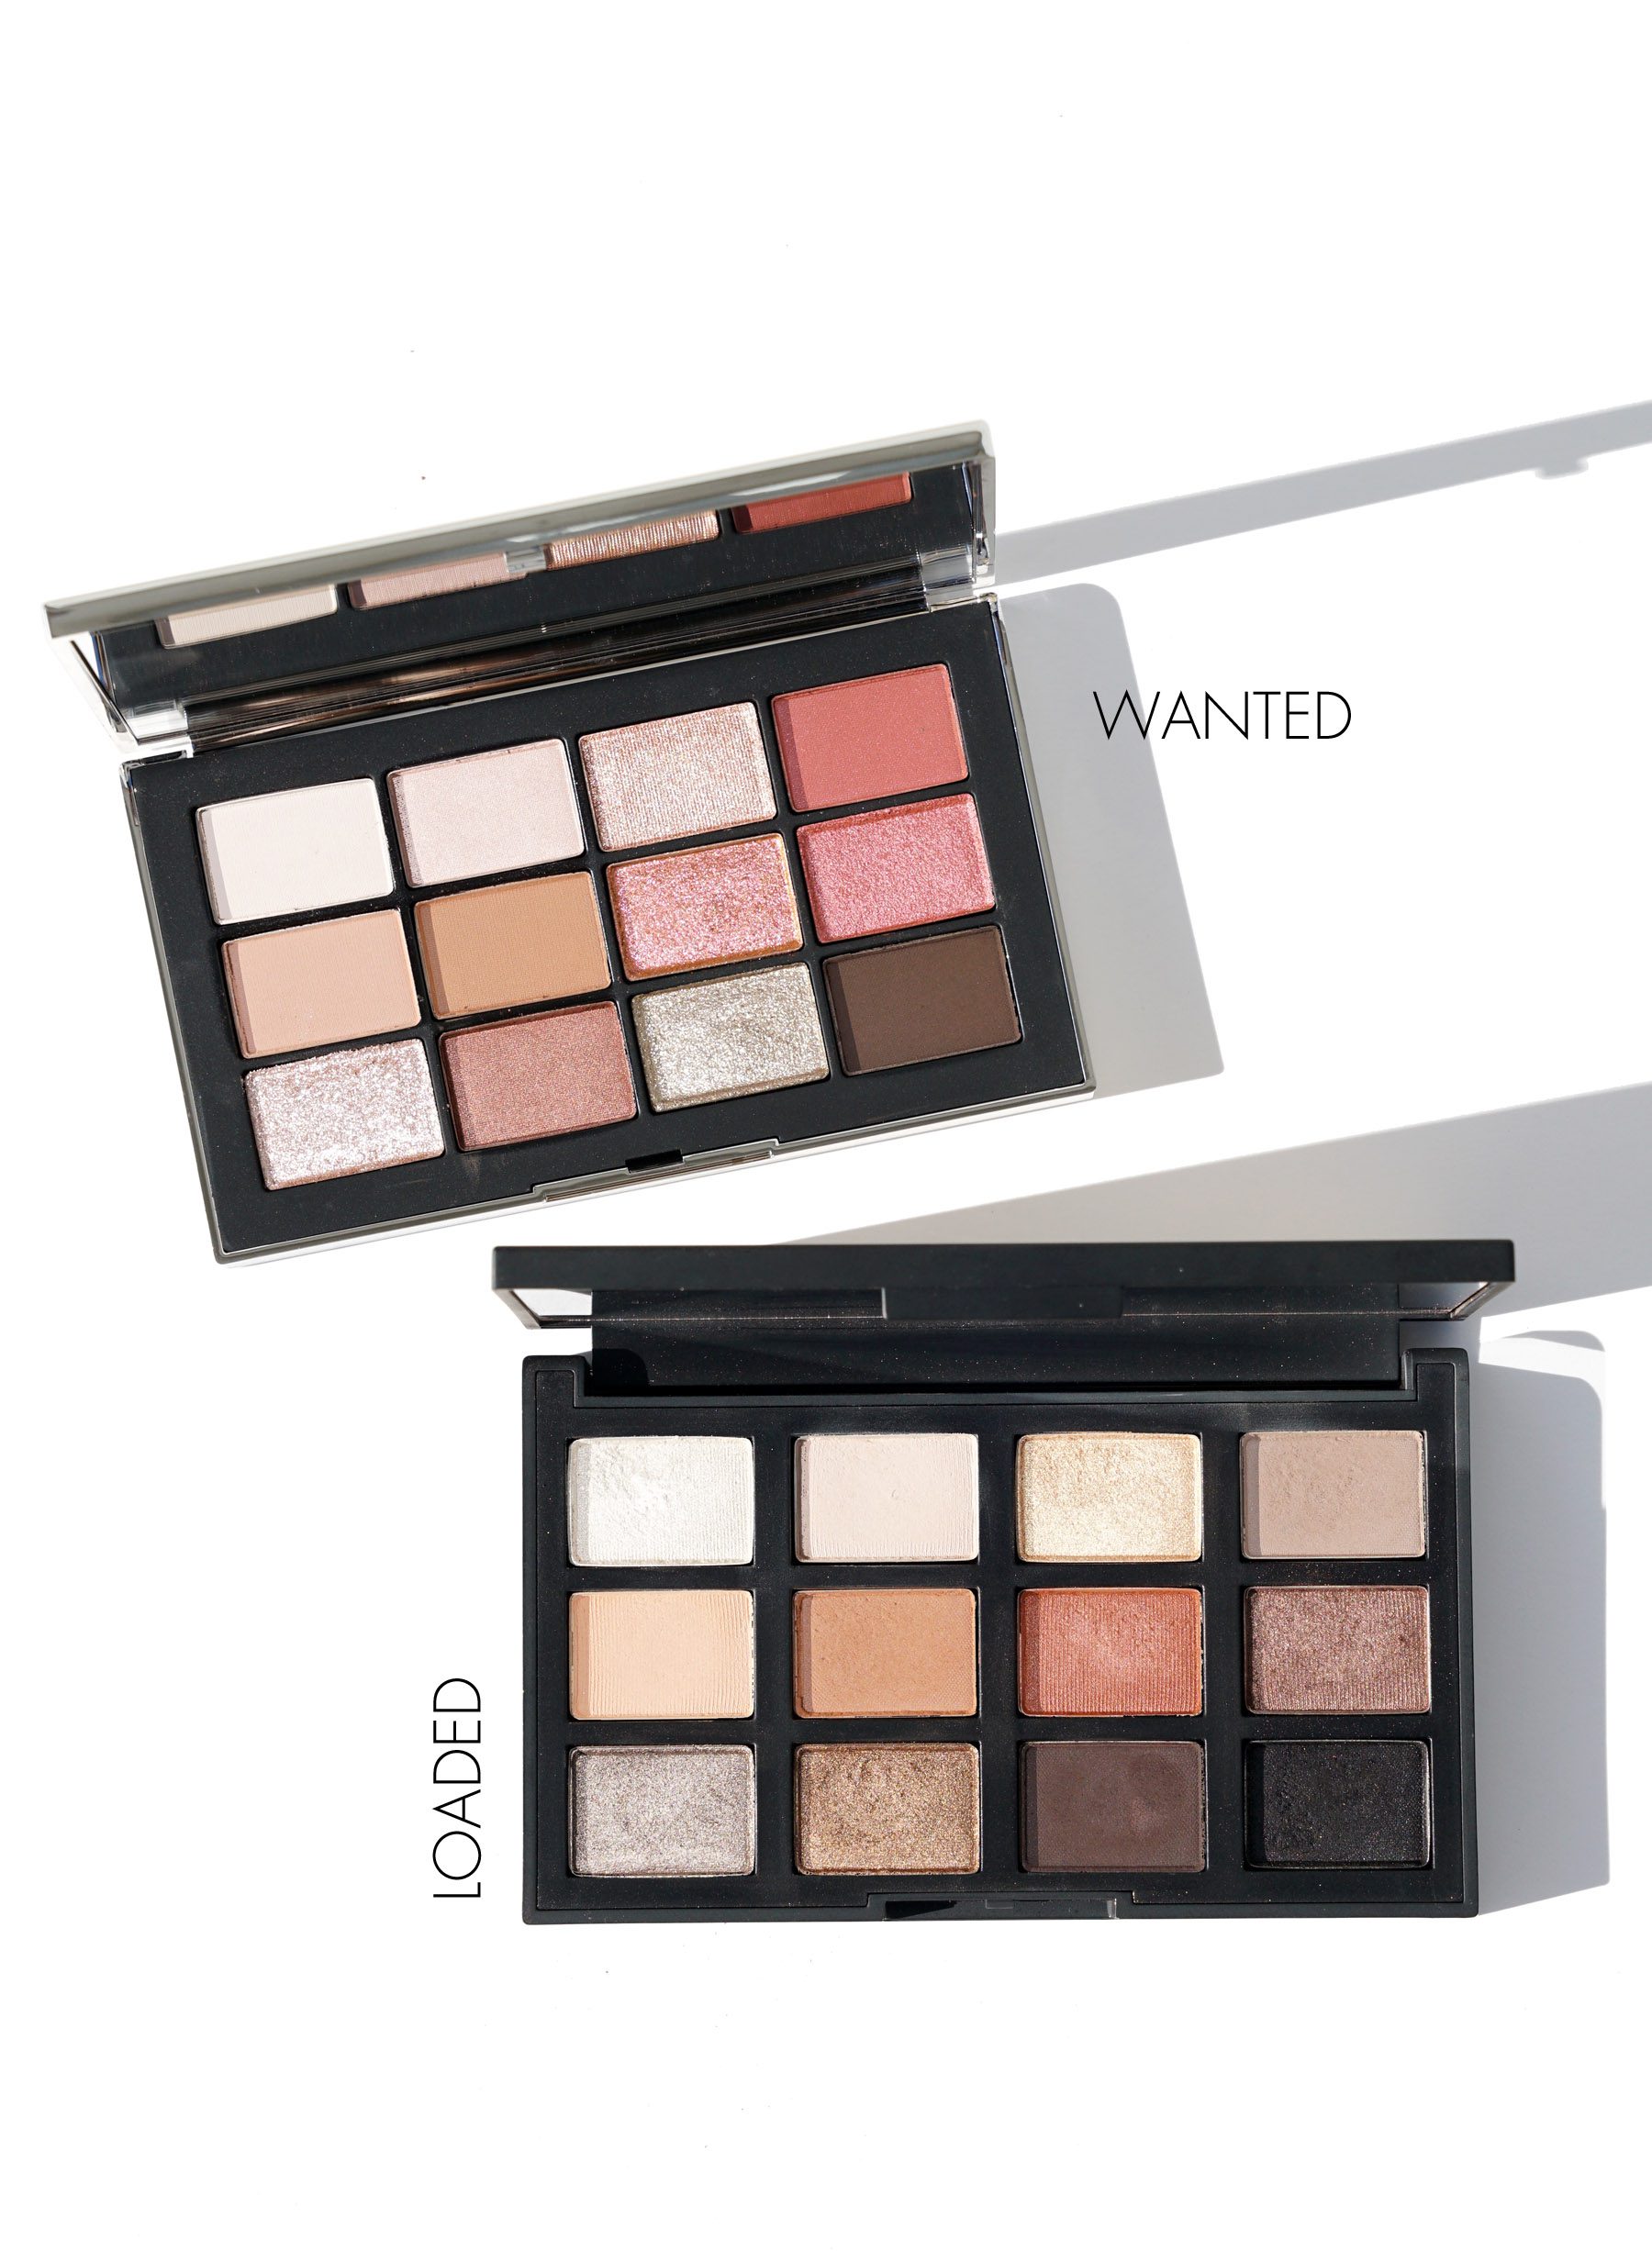 NARS Narsissist Wanted Eyeshadow Palette Review - The Beauty Look Book